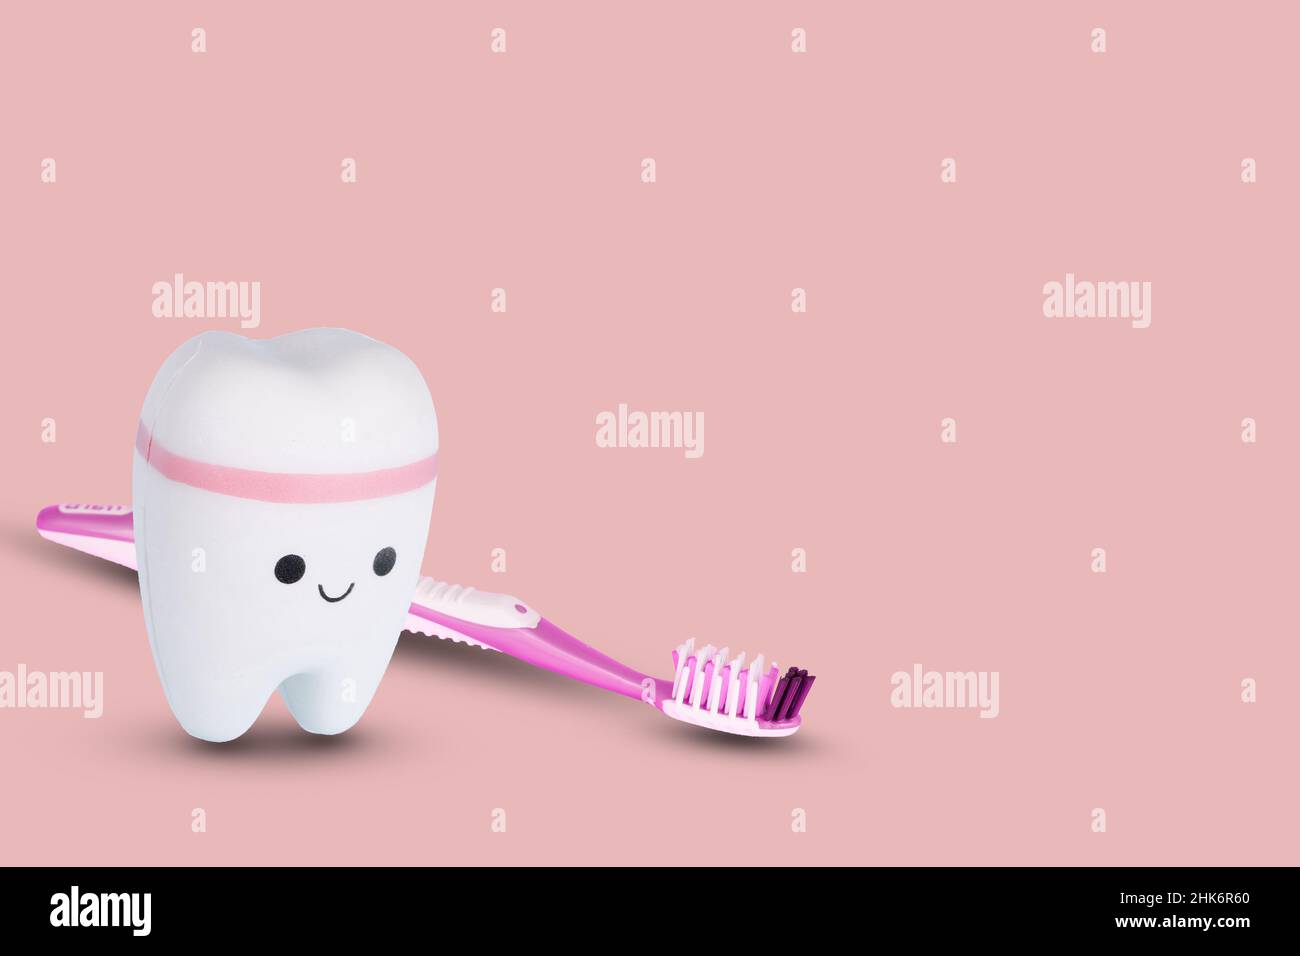 Toothbrush and white tooth on a light pink background. Creative concept of dental examination teeth, dental health and hygiene. Copy space. Stock Photo